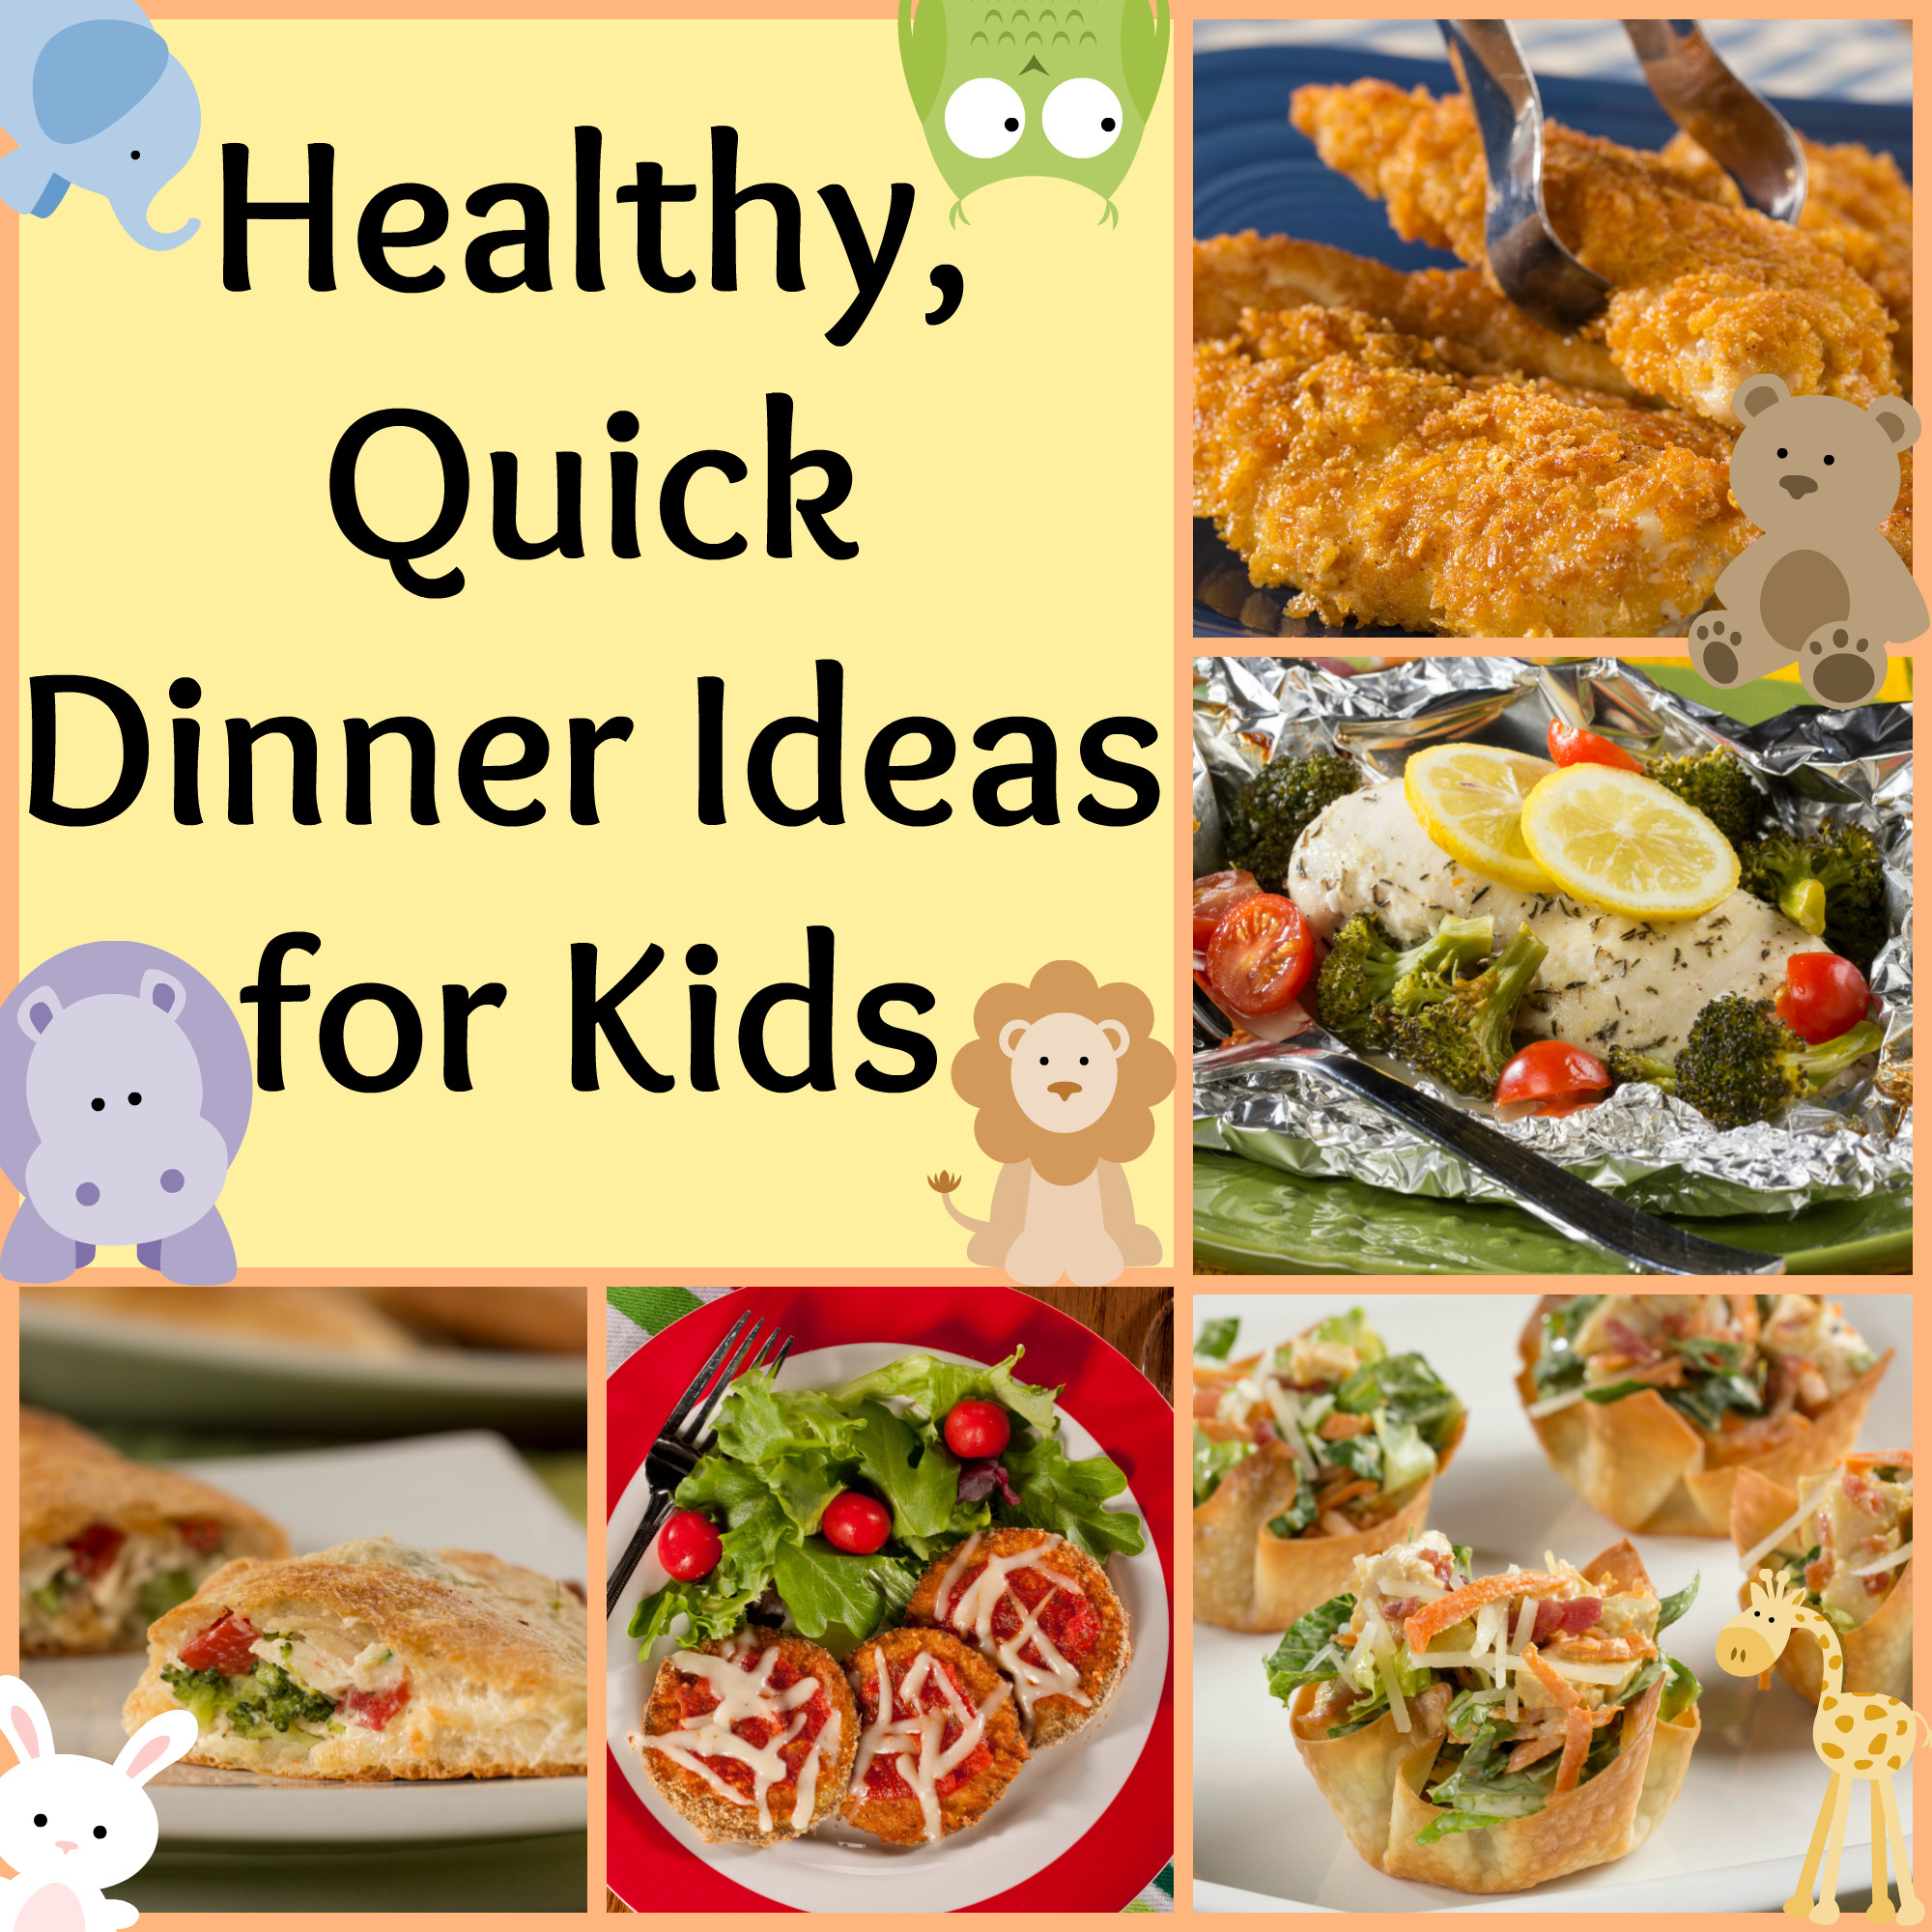 Quick Dinner Recipes For Kids
 Healthy Quick Dinner Ideas for Kids Mr Food s Blog